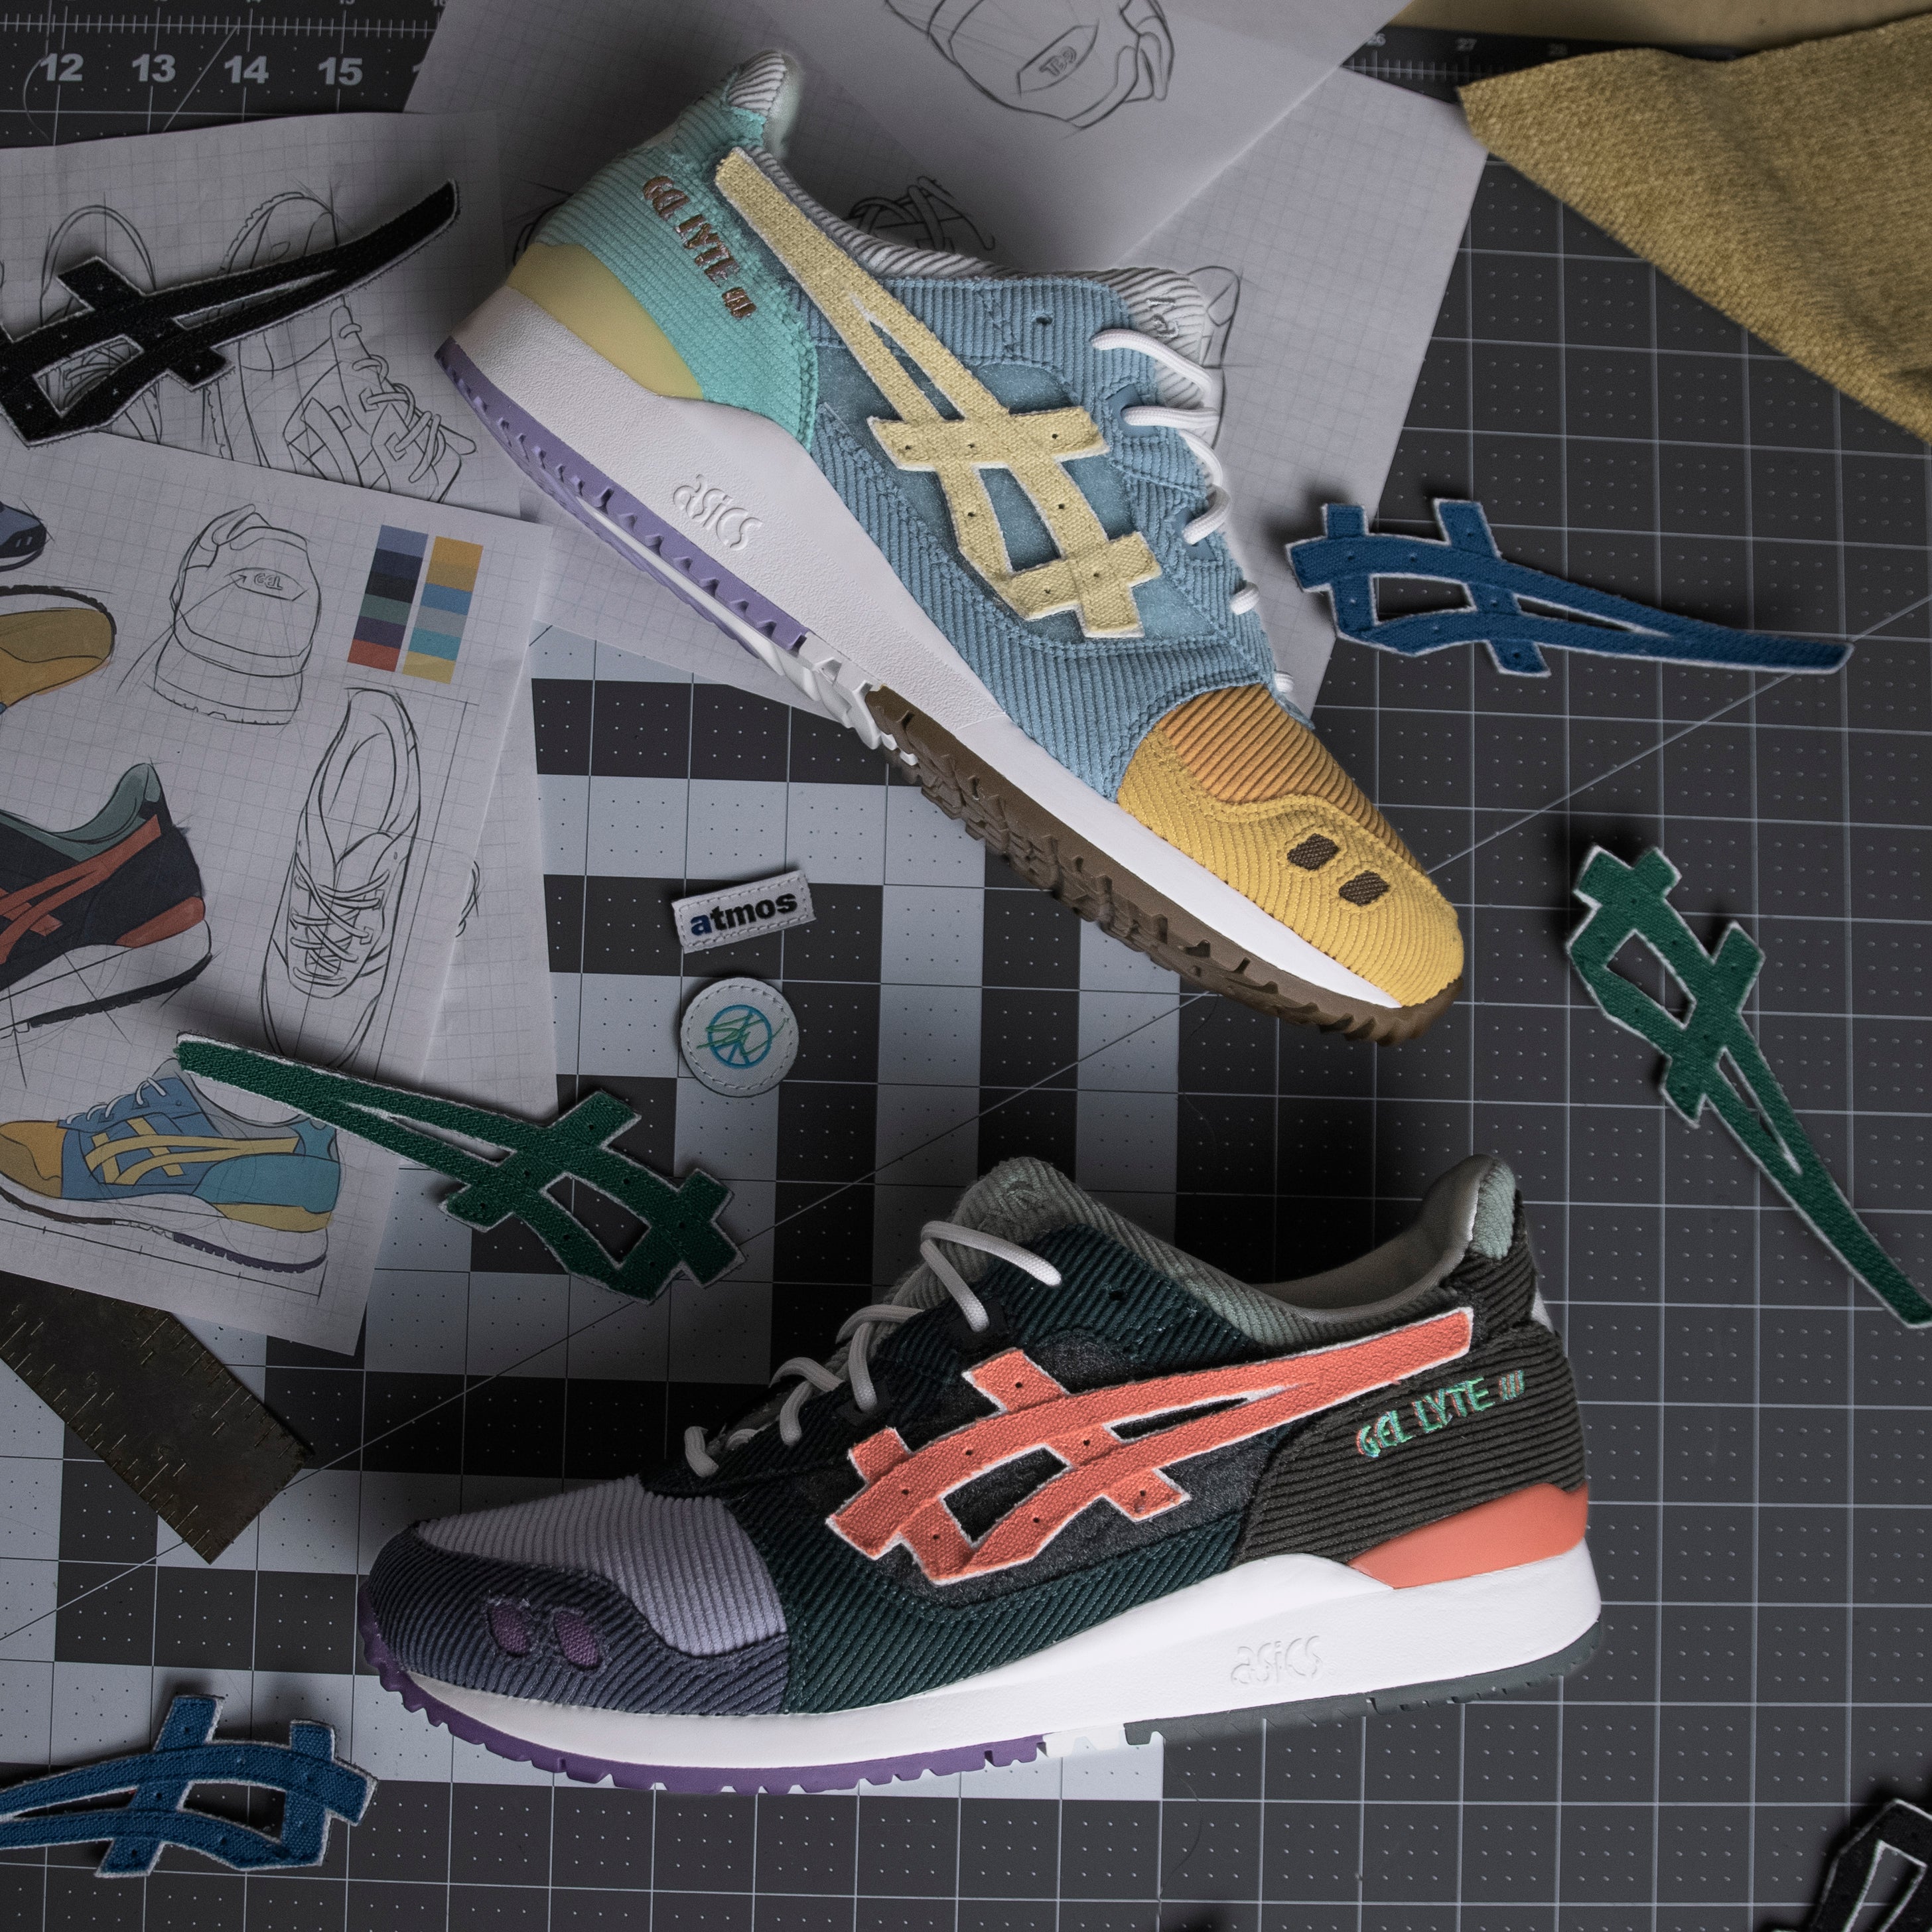 Asics x Atmos x Sean Wotherspoon Gel Lyte III card image